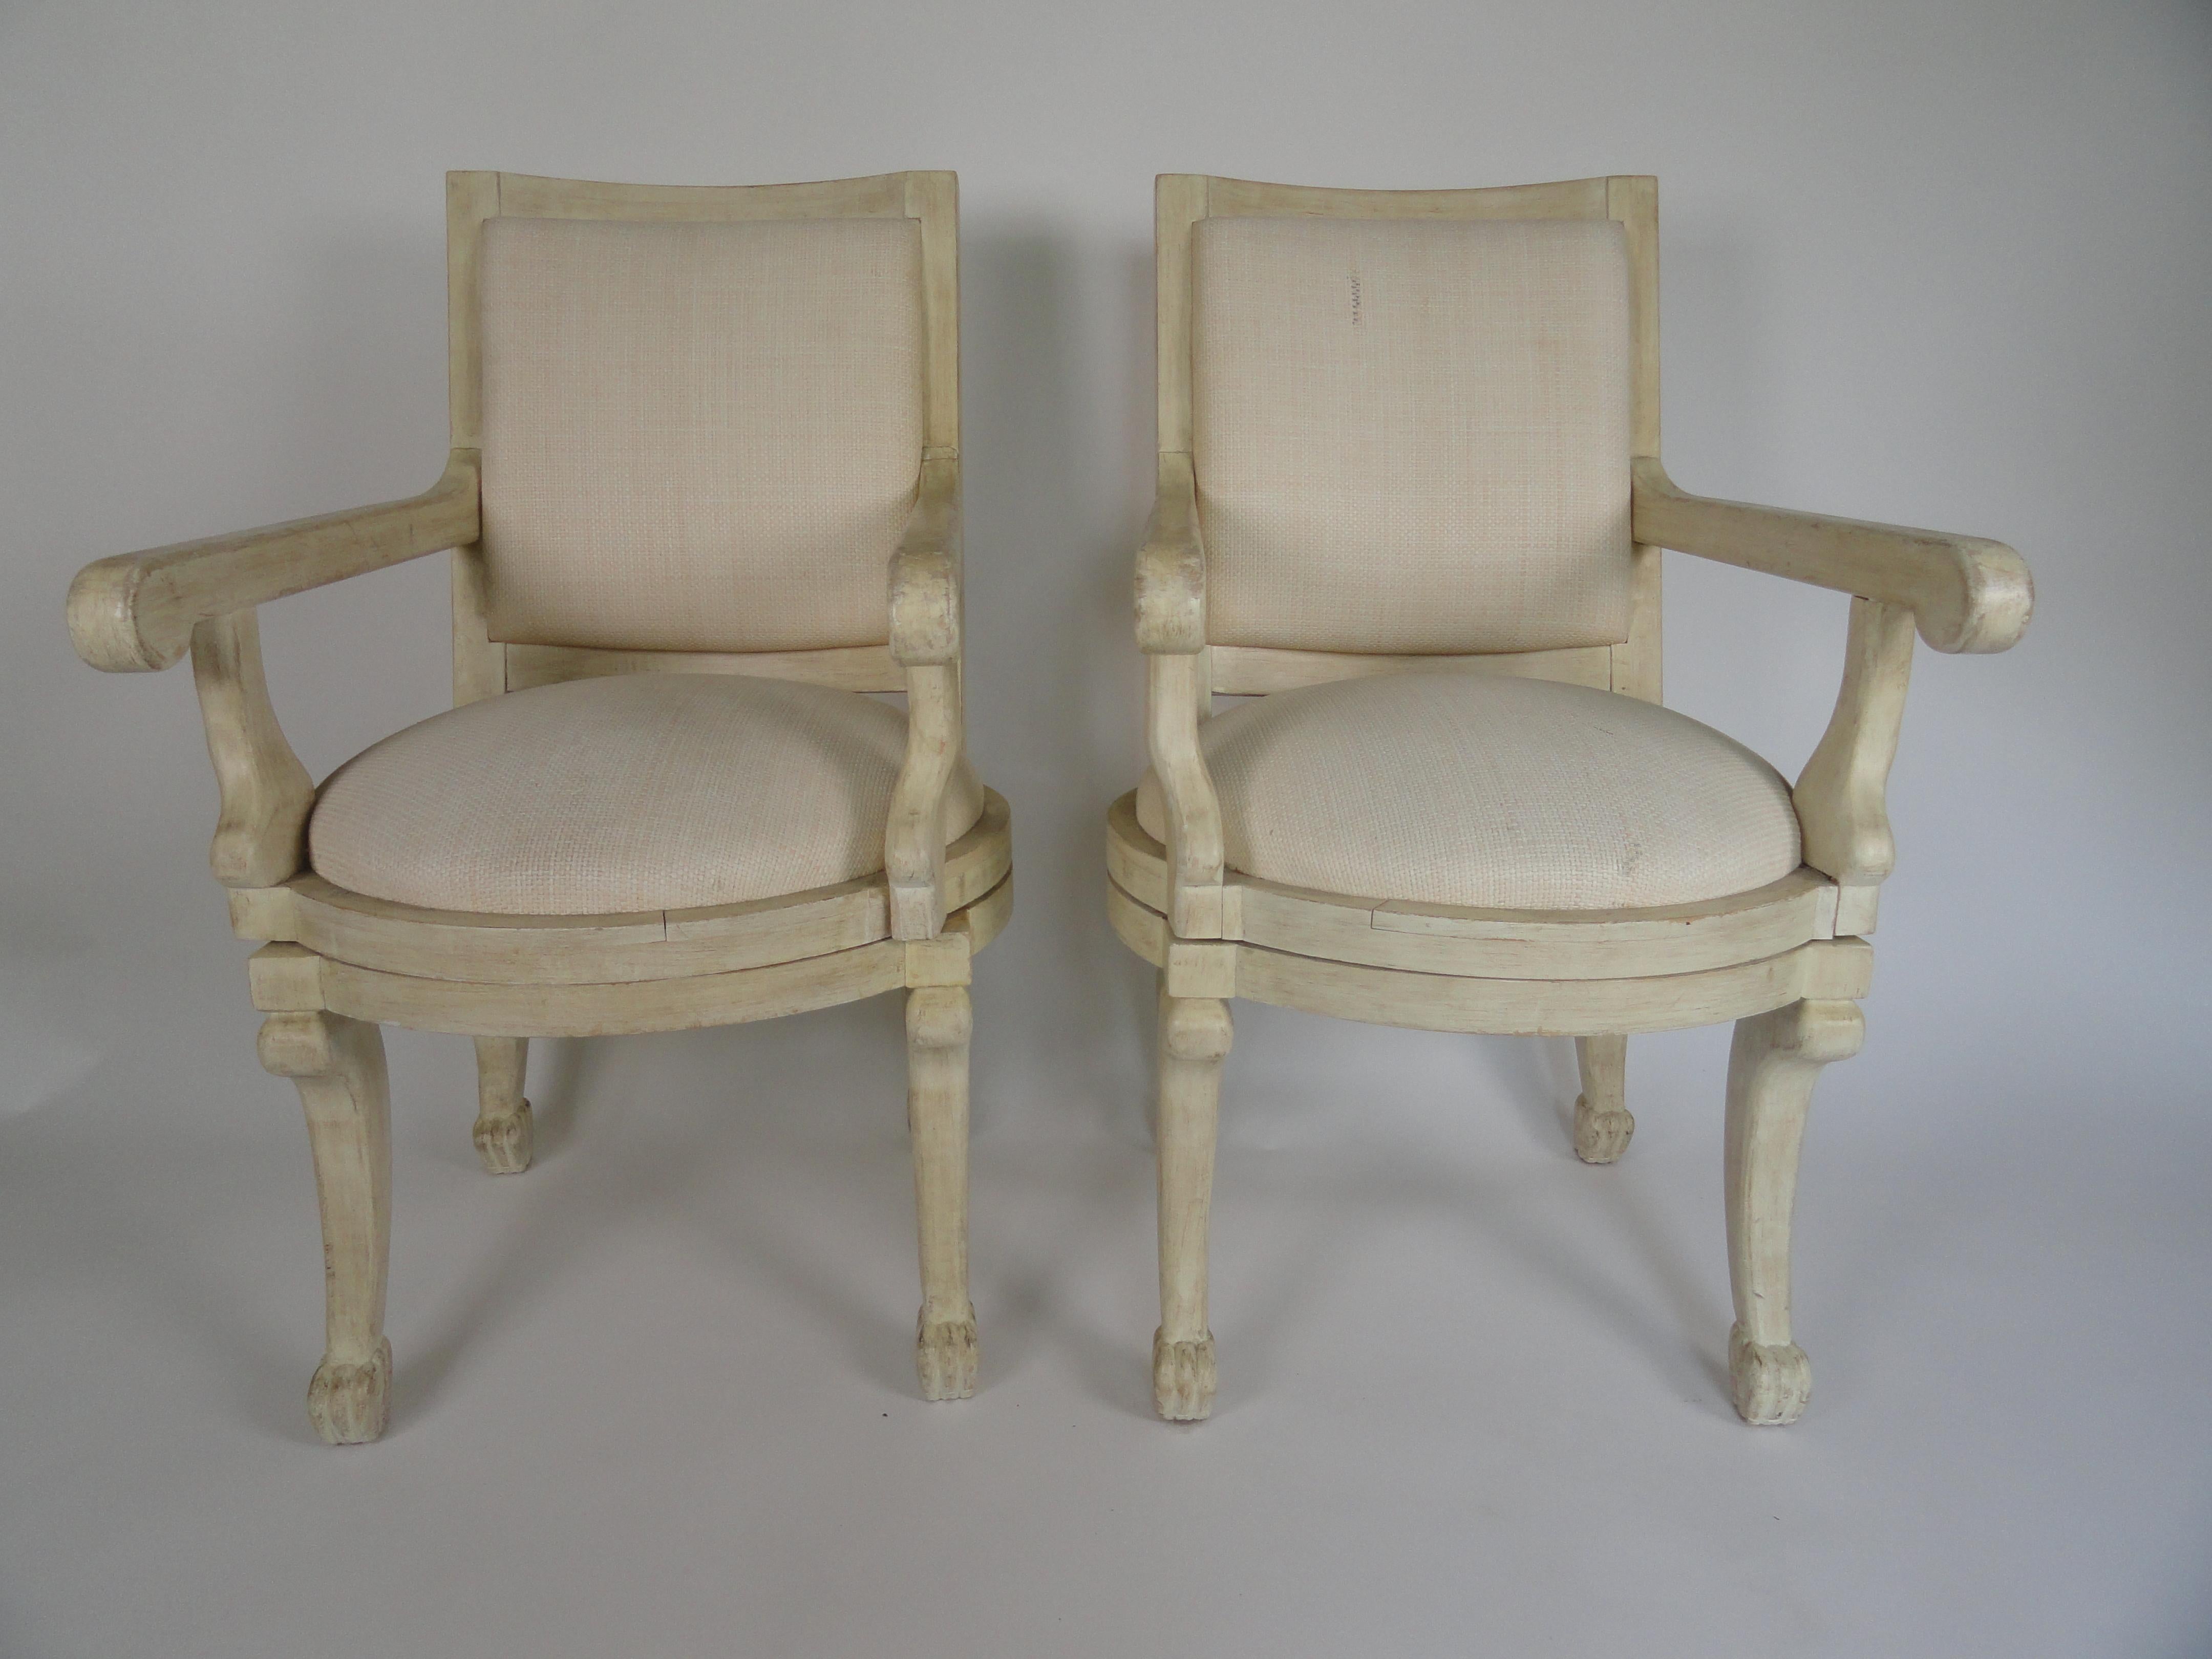 Pair of swivel armchairs in the manner of John Dickinson, sculpted wood. Finish varies. It is smooth on the back but rough, textured on the arms.  Upholstered in natural raffia, which shows natural flaws in the material.